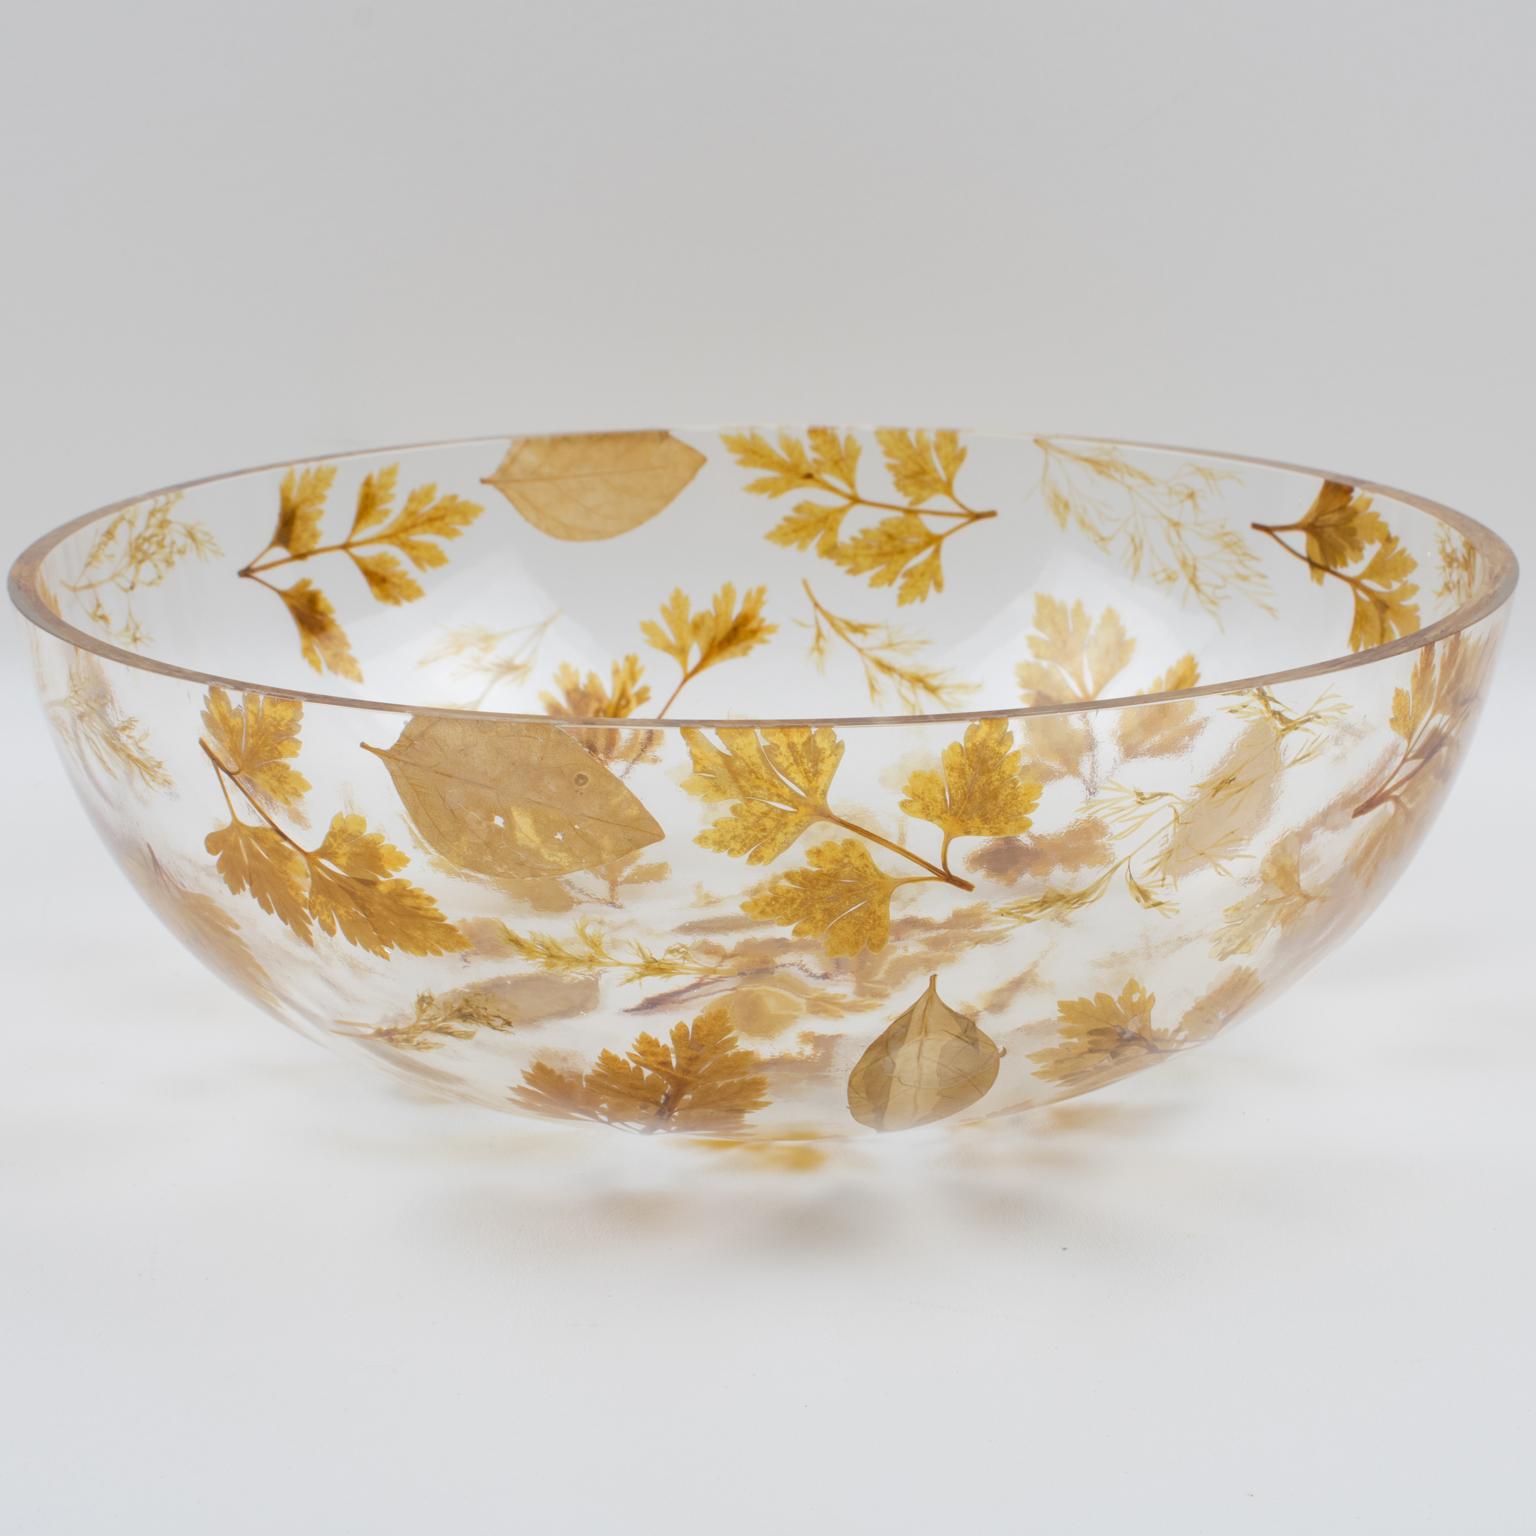 A lovely resin decorative bowl, centerpiece, or serving dish designed by Resinplast Italy in the 1970s. Extra thick clear resin or acrylic in a deep rounded bowl shape with assorted real autumn leaves embedded in the material. The natural light